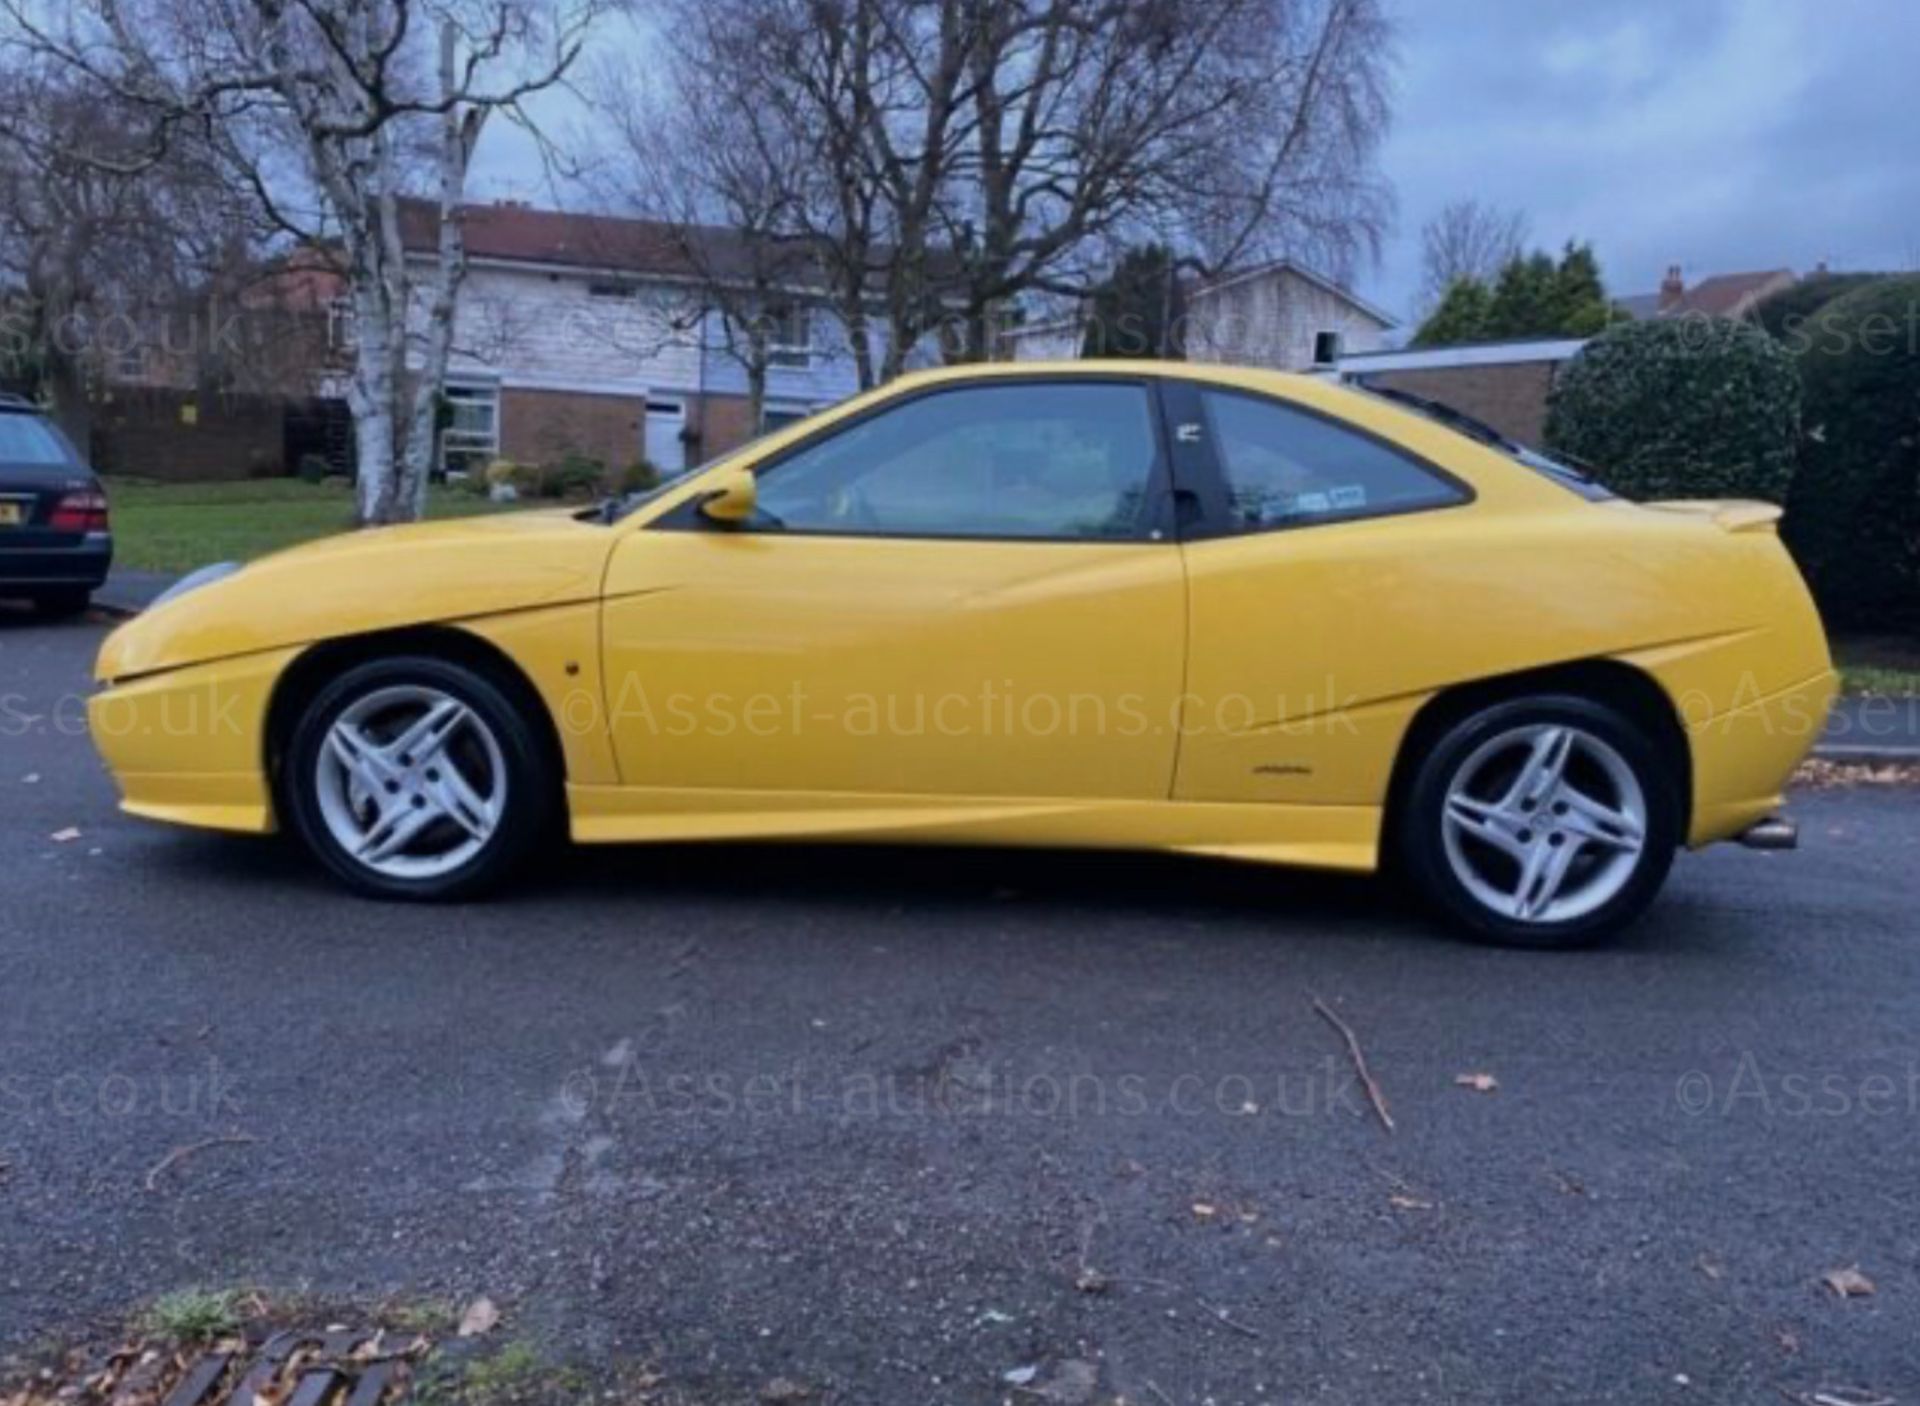 1996 FIAT COUPE 20V TURBO YELLOW SALOON, 2.0 PETROL ENGINE, SHOWING 95K MILES *NO VAT* - Image 4 of 12